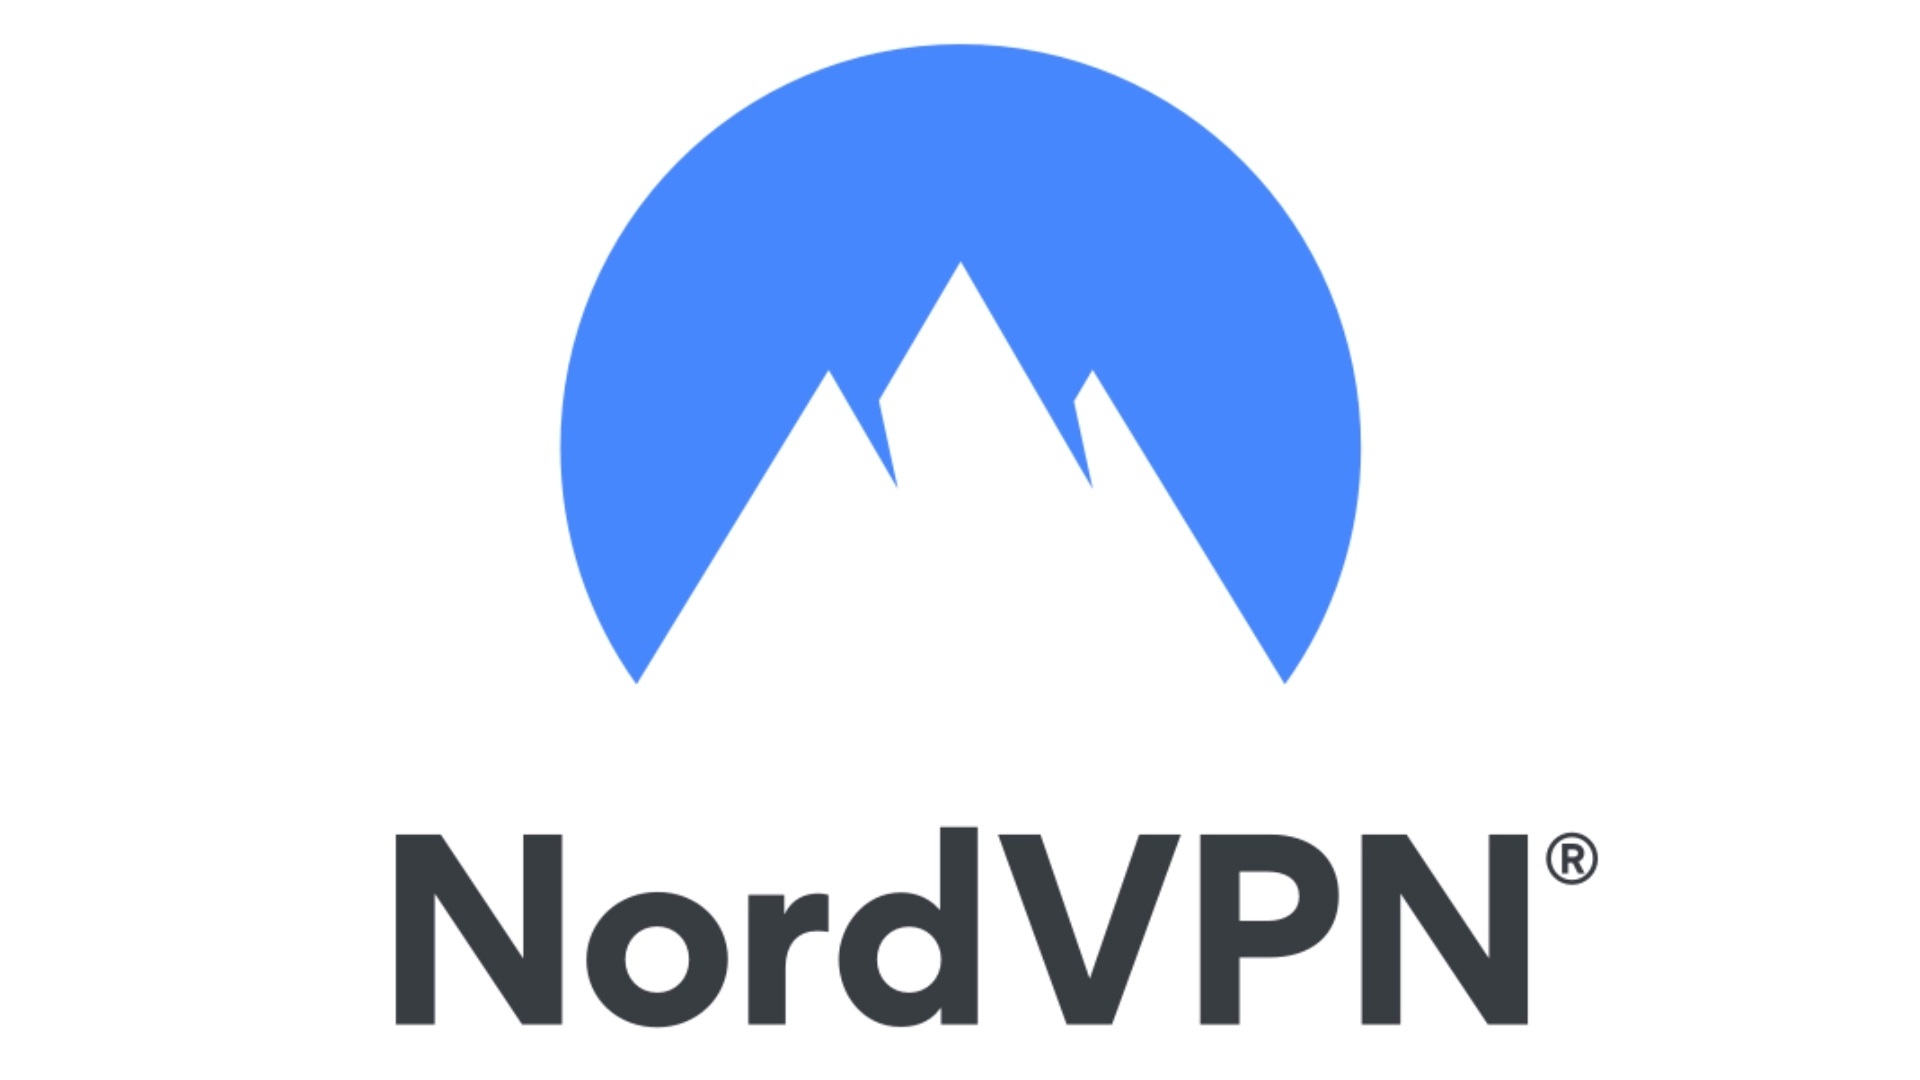 Fastest VPN: NordVPN. Its logo is displayed on a white background.